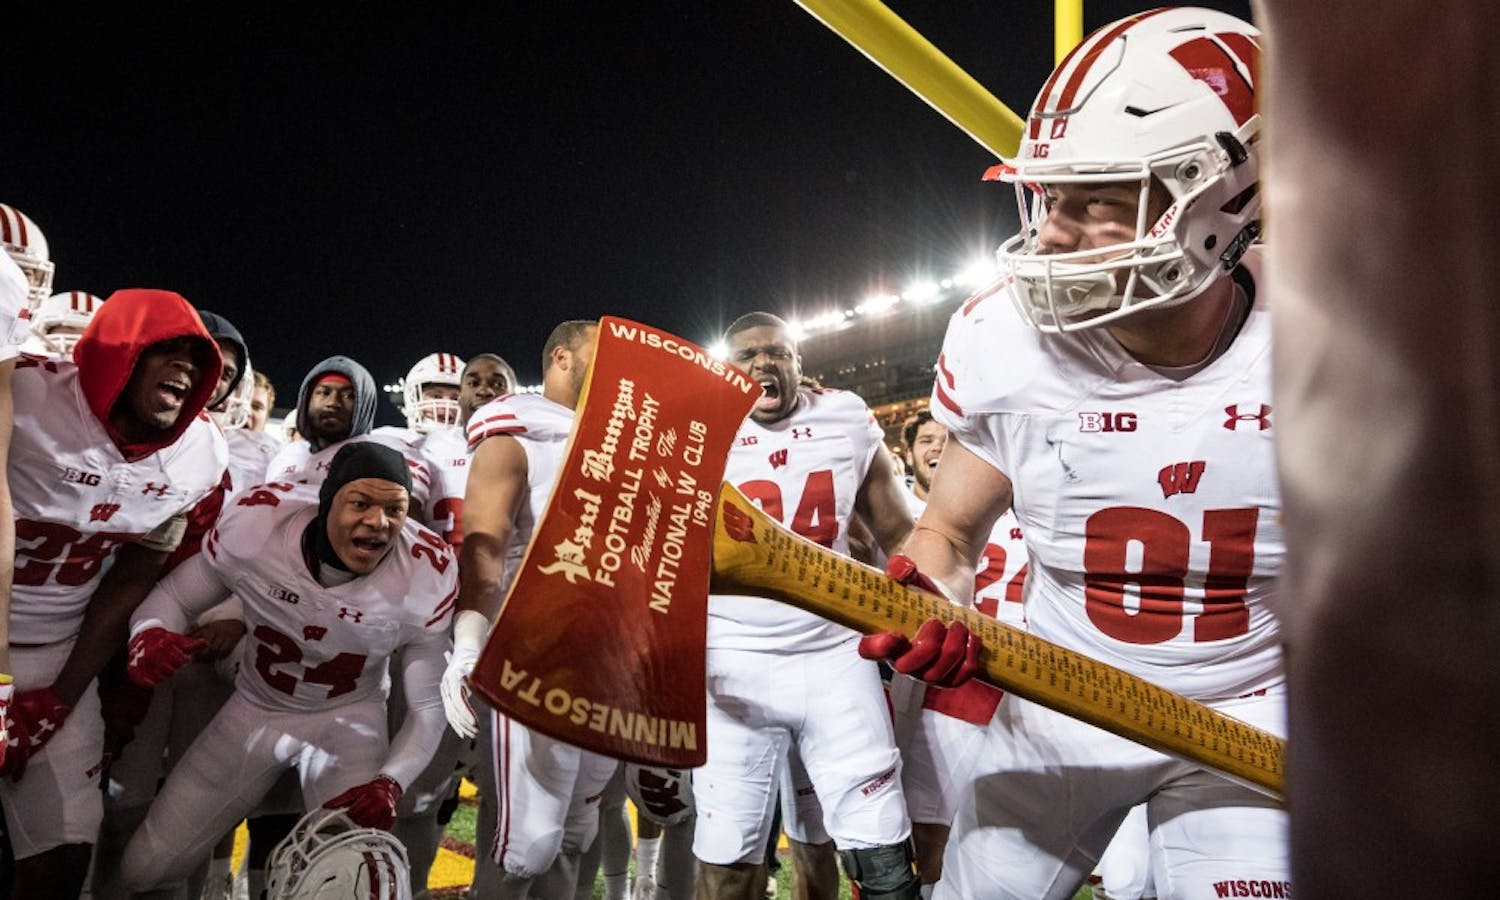 Gallery: Wisconsin completes undefeated season with 31-0 rout of Minnesota